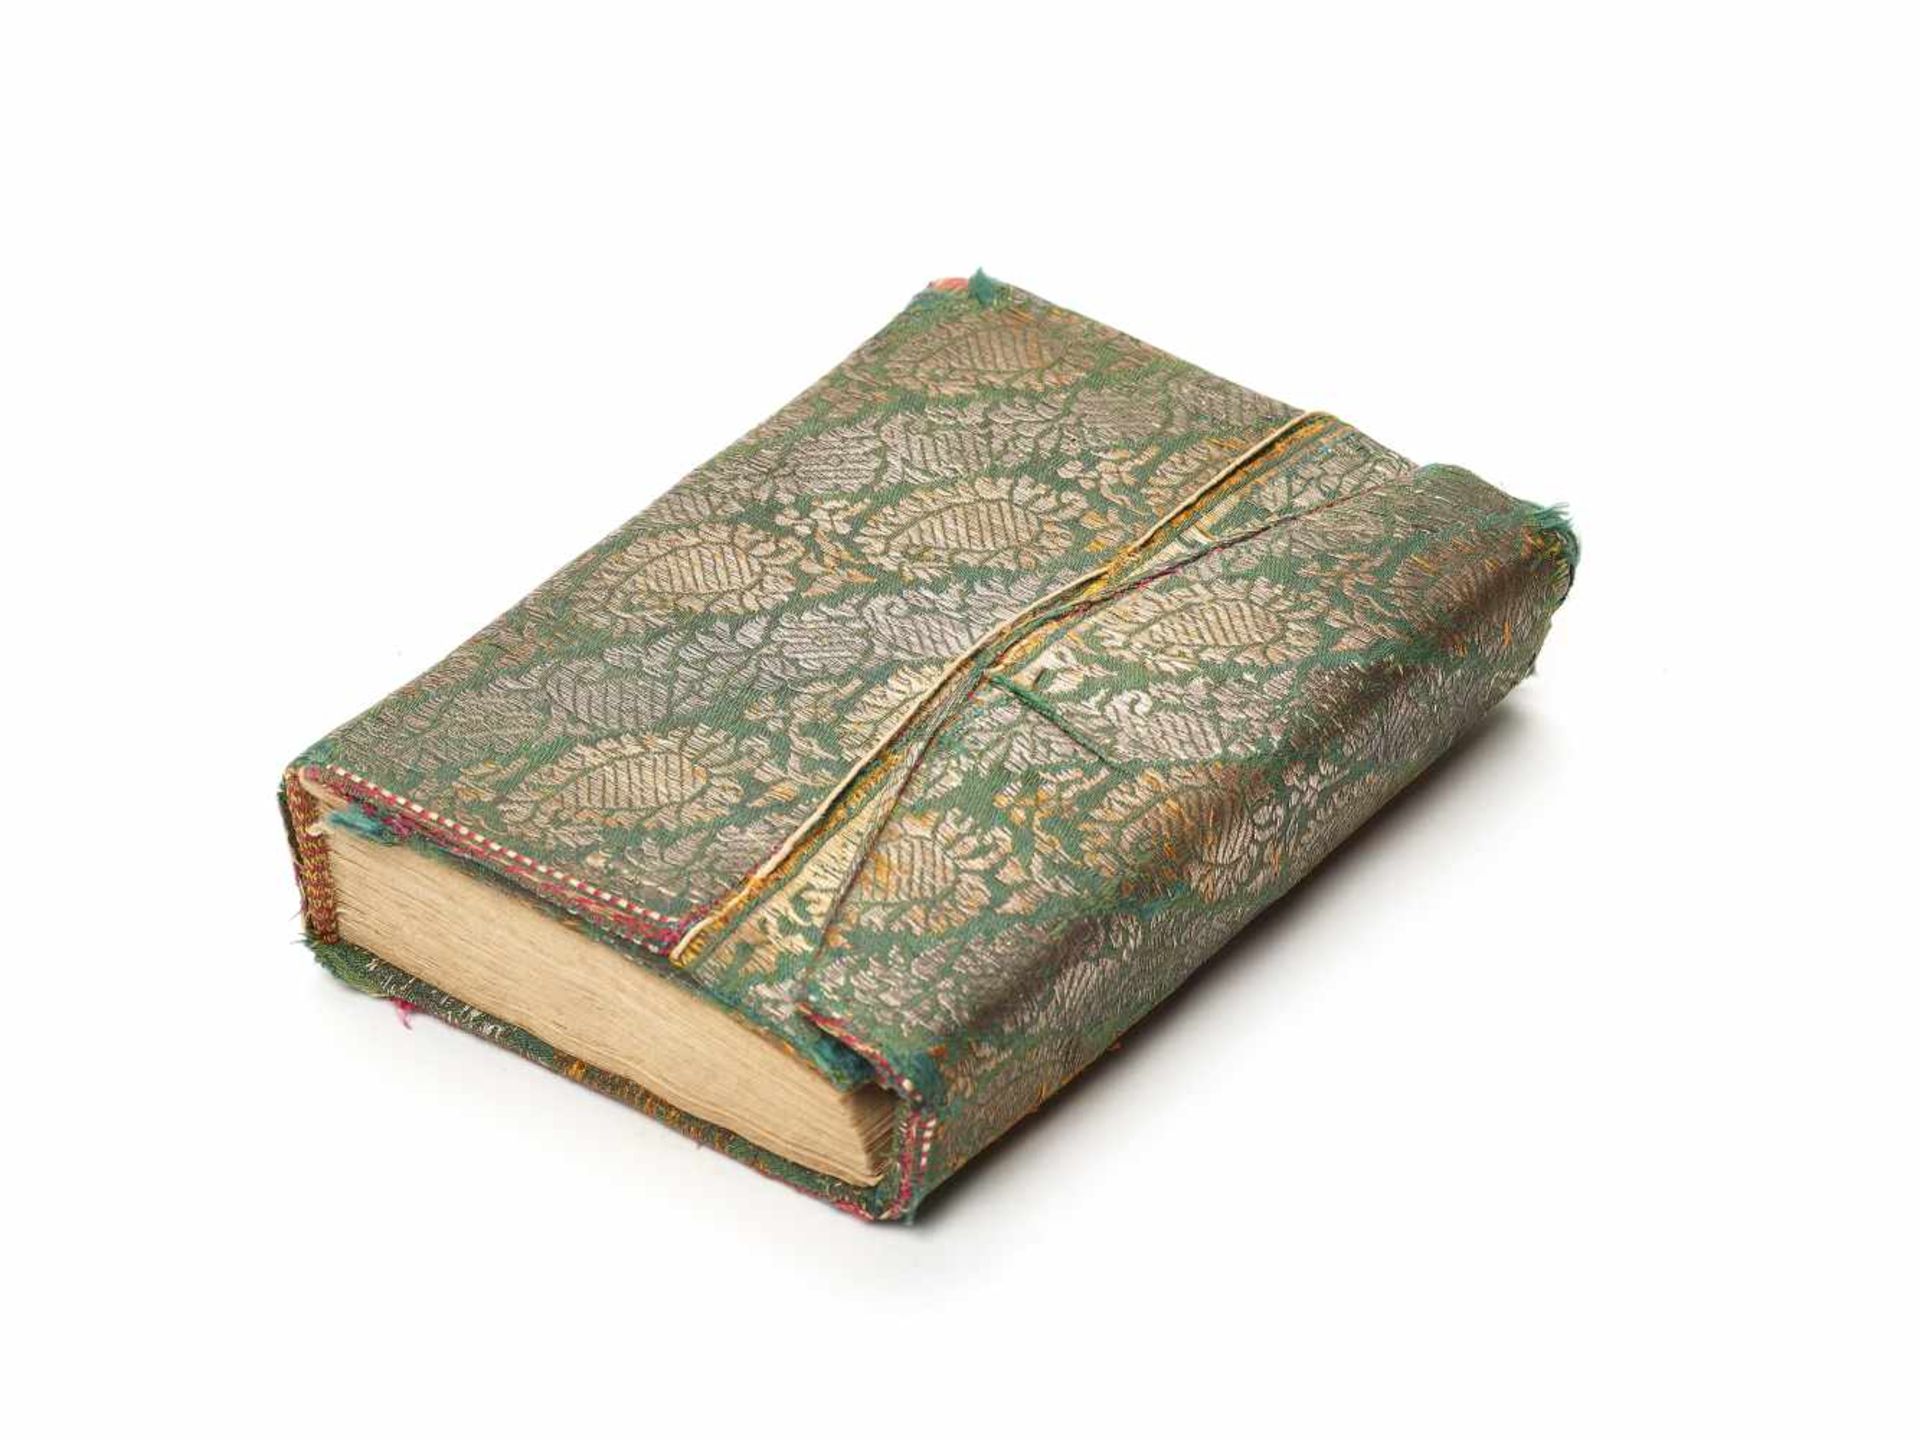 AN INDIAN MANUSCRIPT - 19th CENTURYFabric cover with inside paper pages, hand painted with colors - Bild 3 aus 4